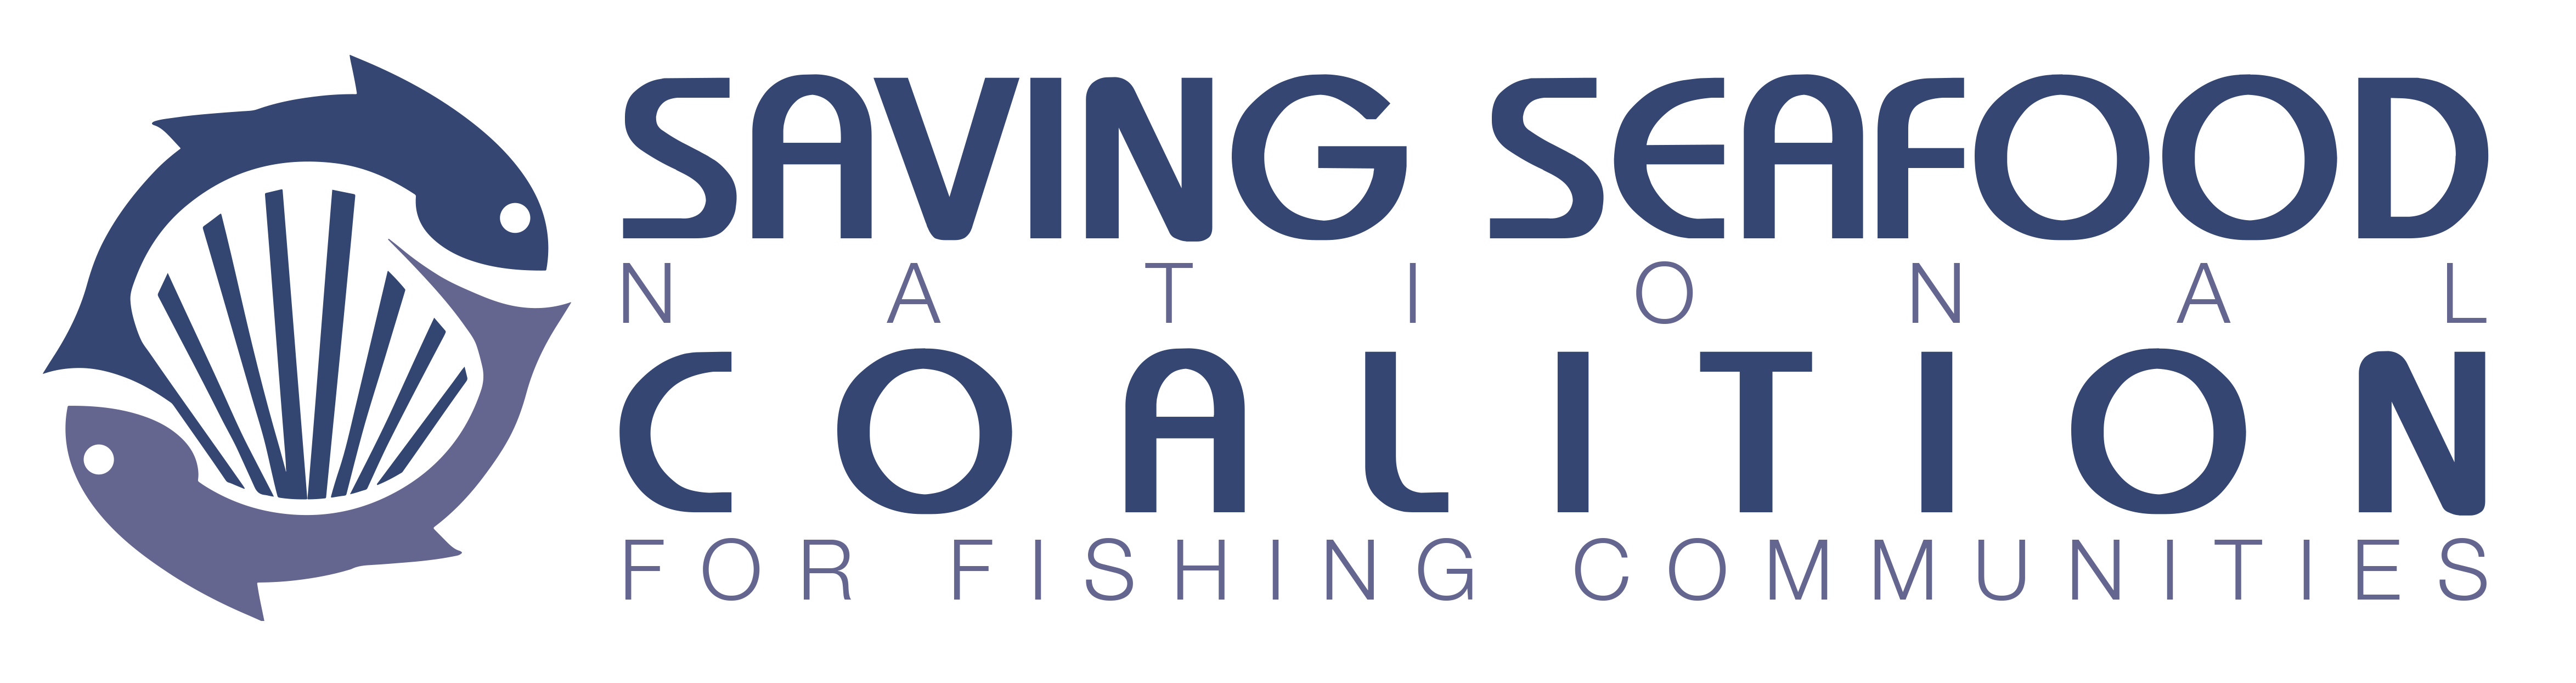 National Coalition for Fishing Communities, Tuesday, March 24, 2020, Press release picture